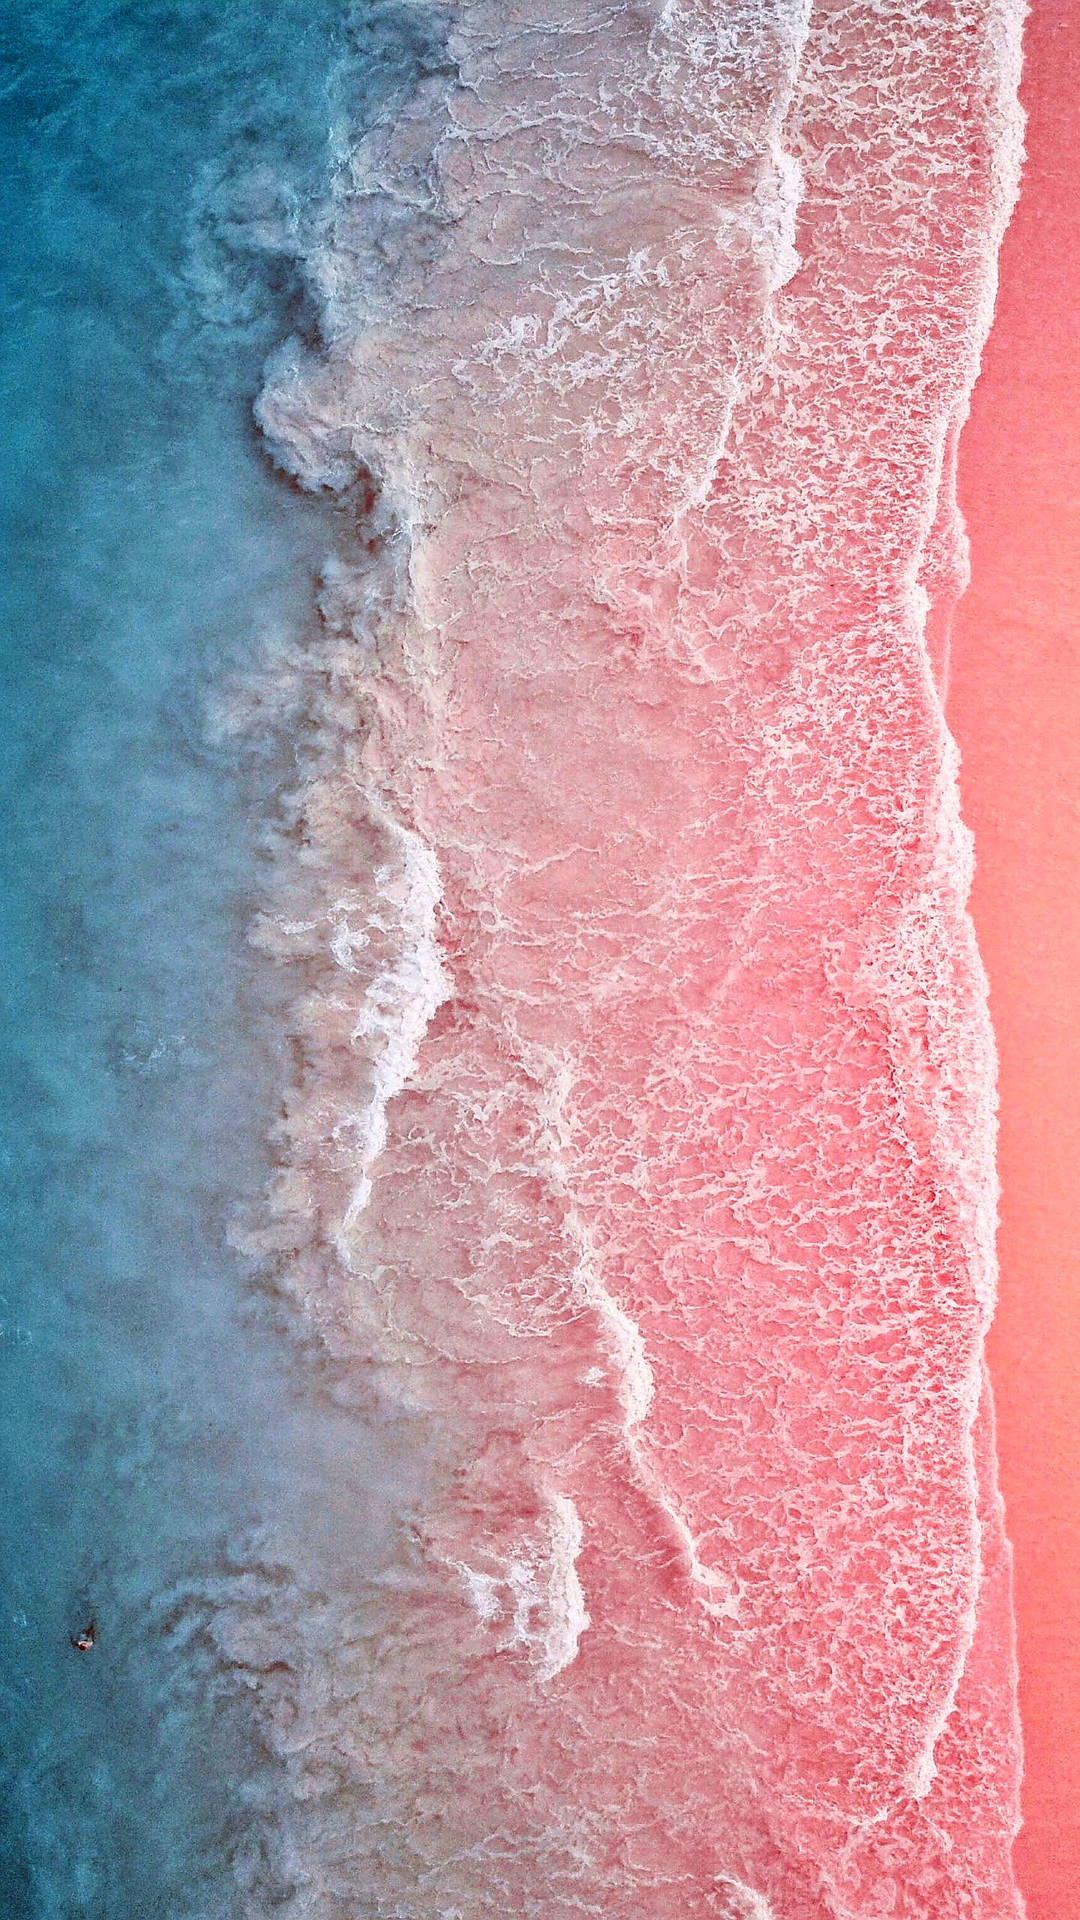 100+] Beach Wave Iphone Wallpapers | Wallpapers.com